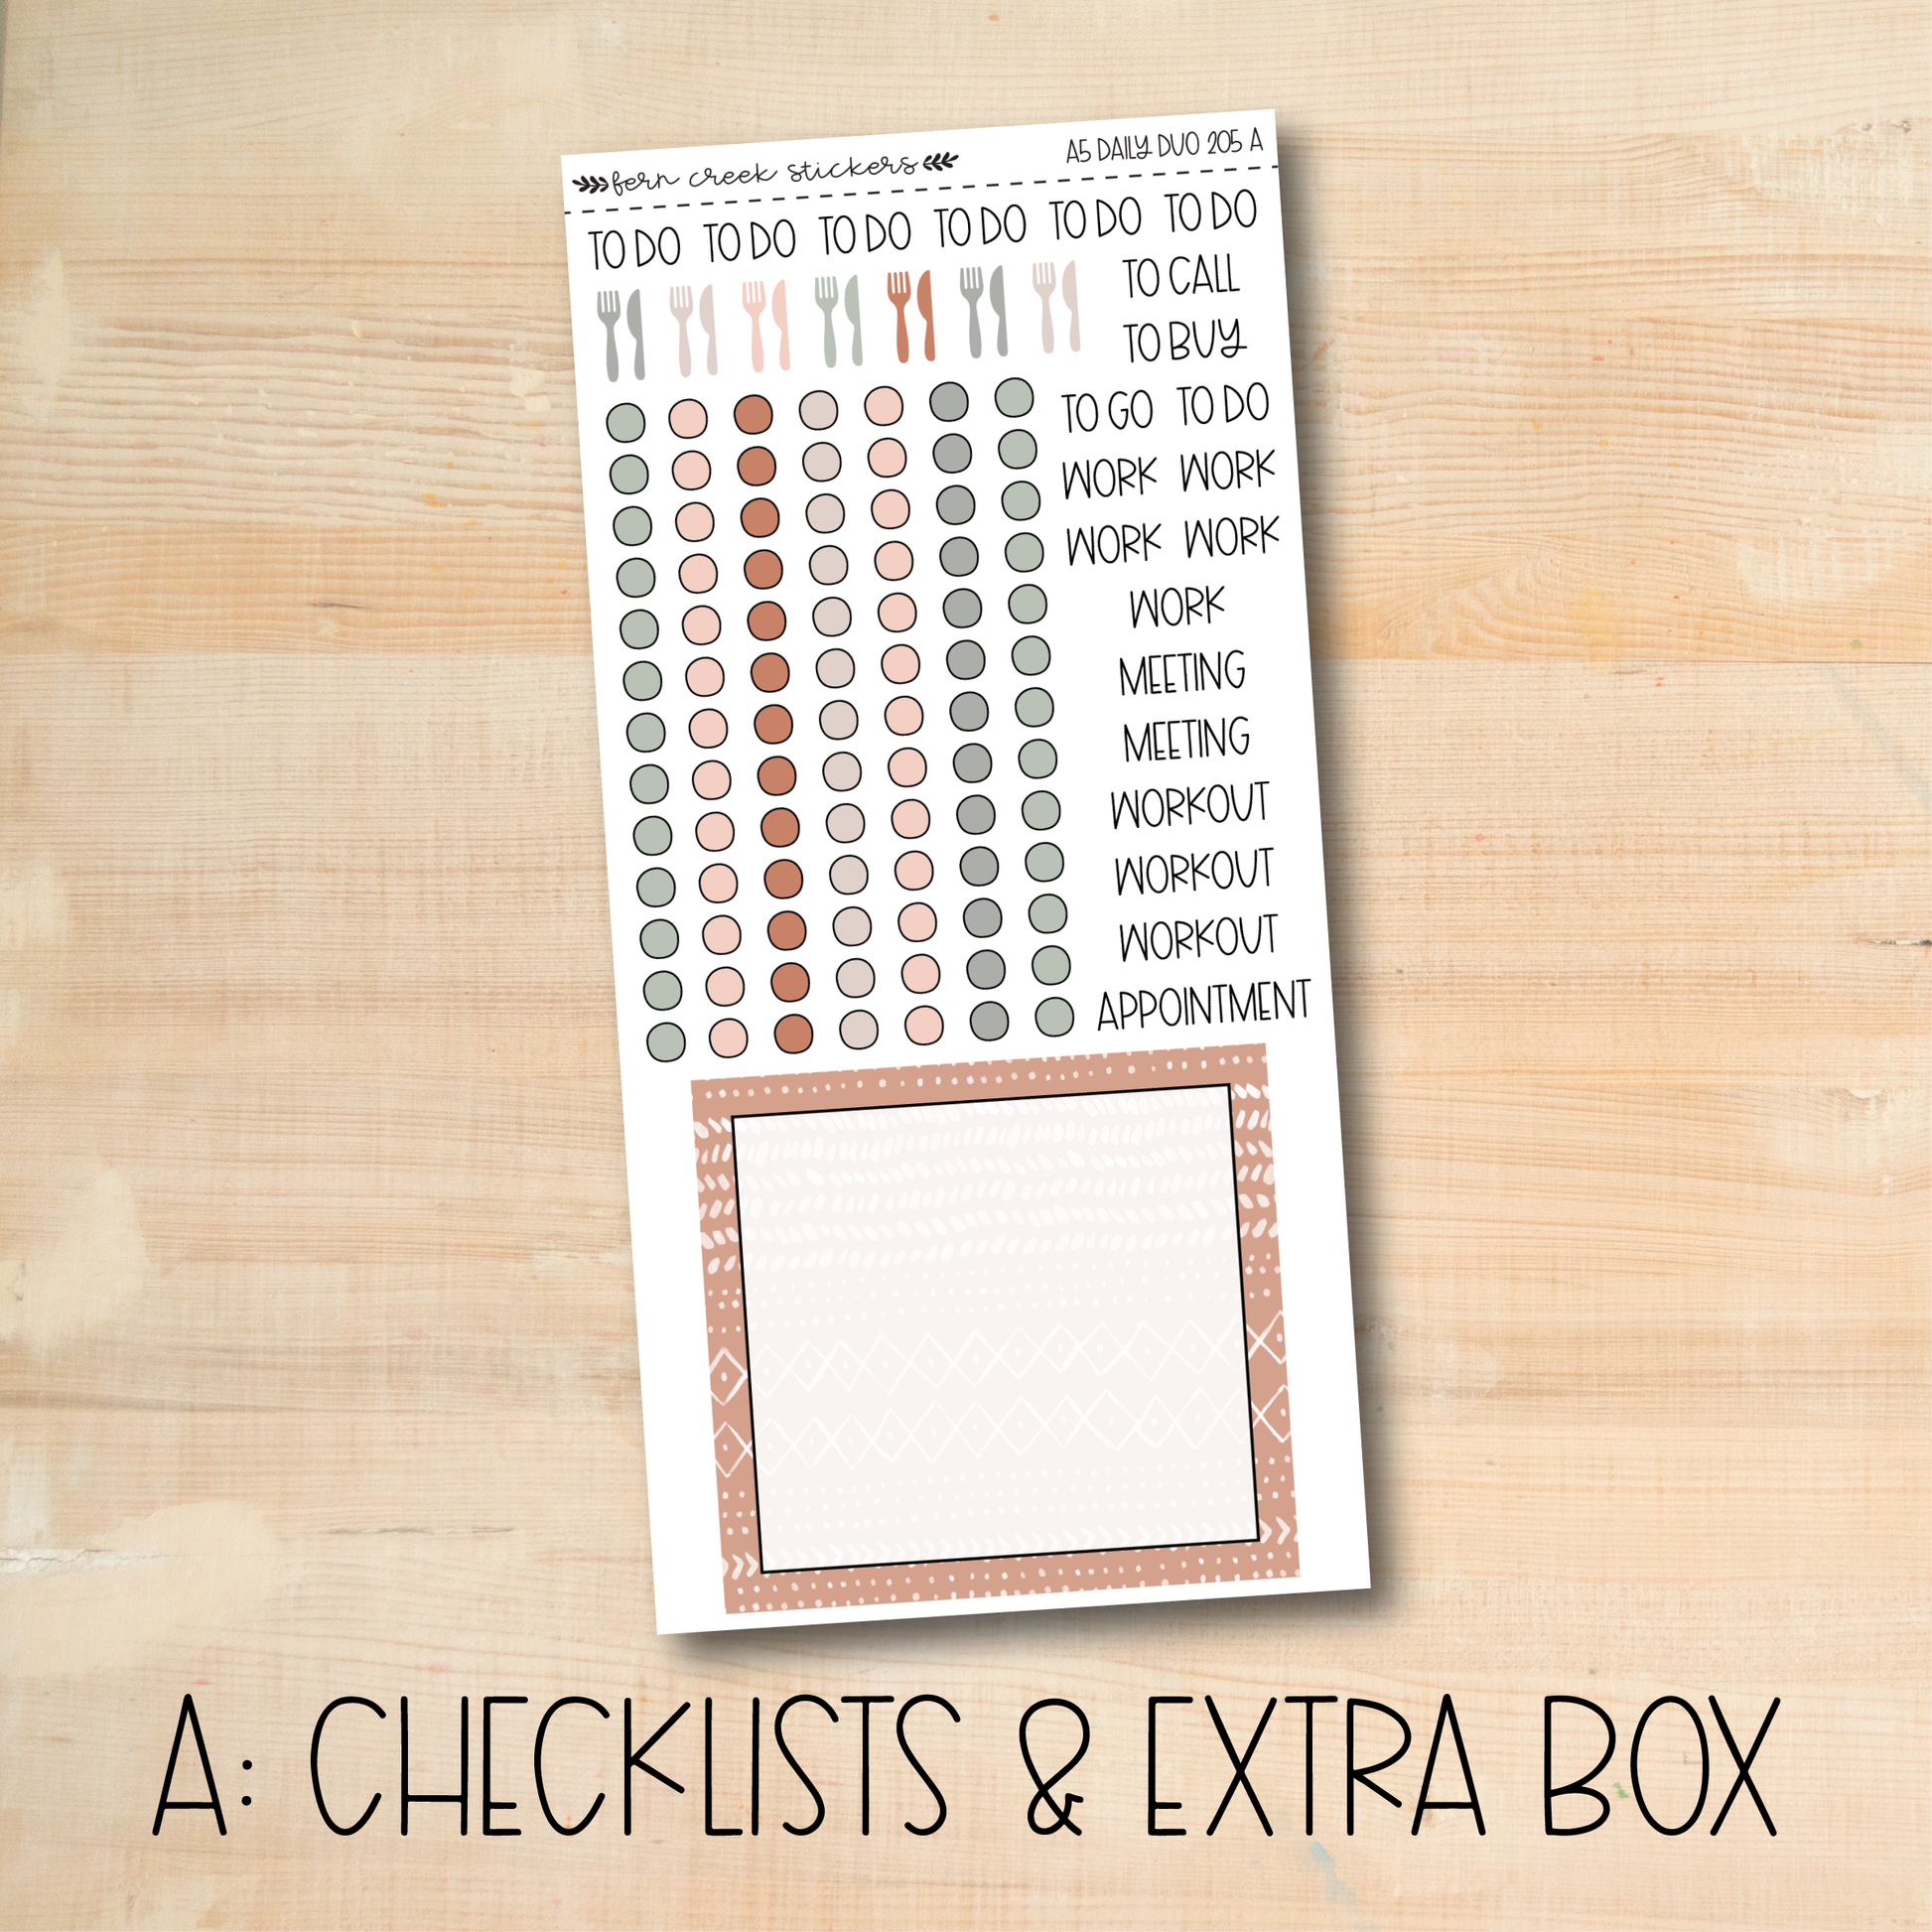 a checklist and extra box of stickers